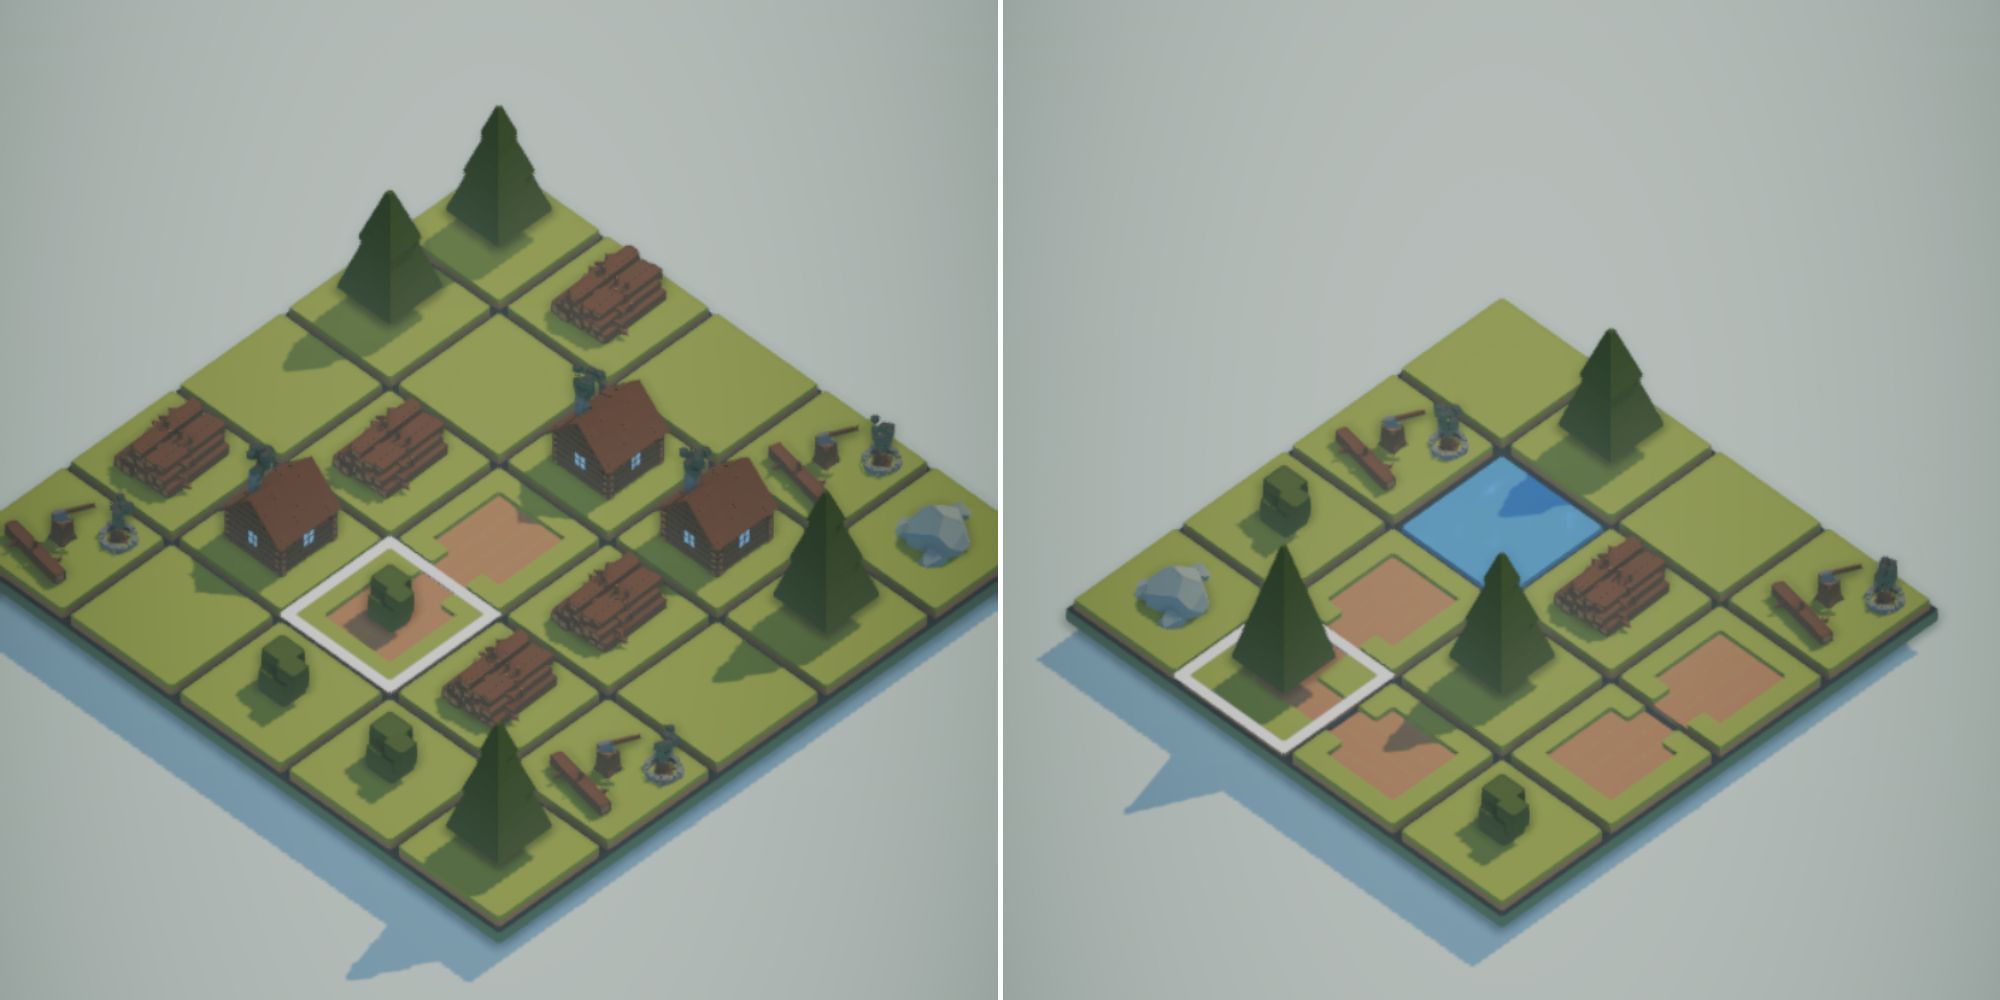 Placing down hedges onto the grid and a different map with a pond in Teeny Tiny Town